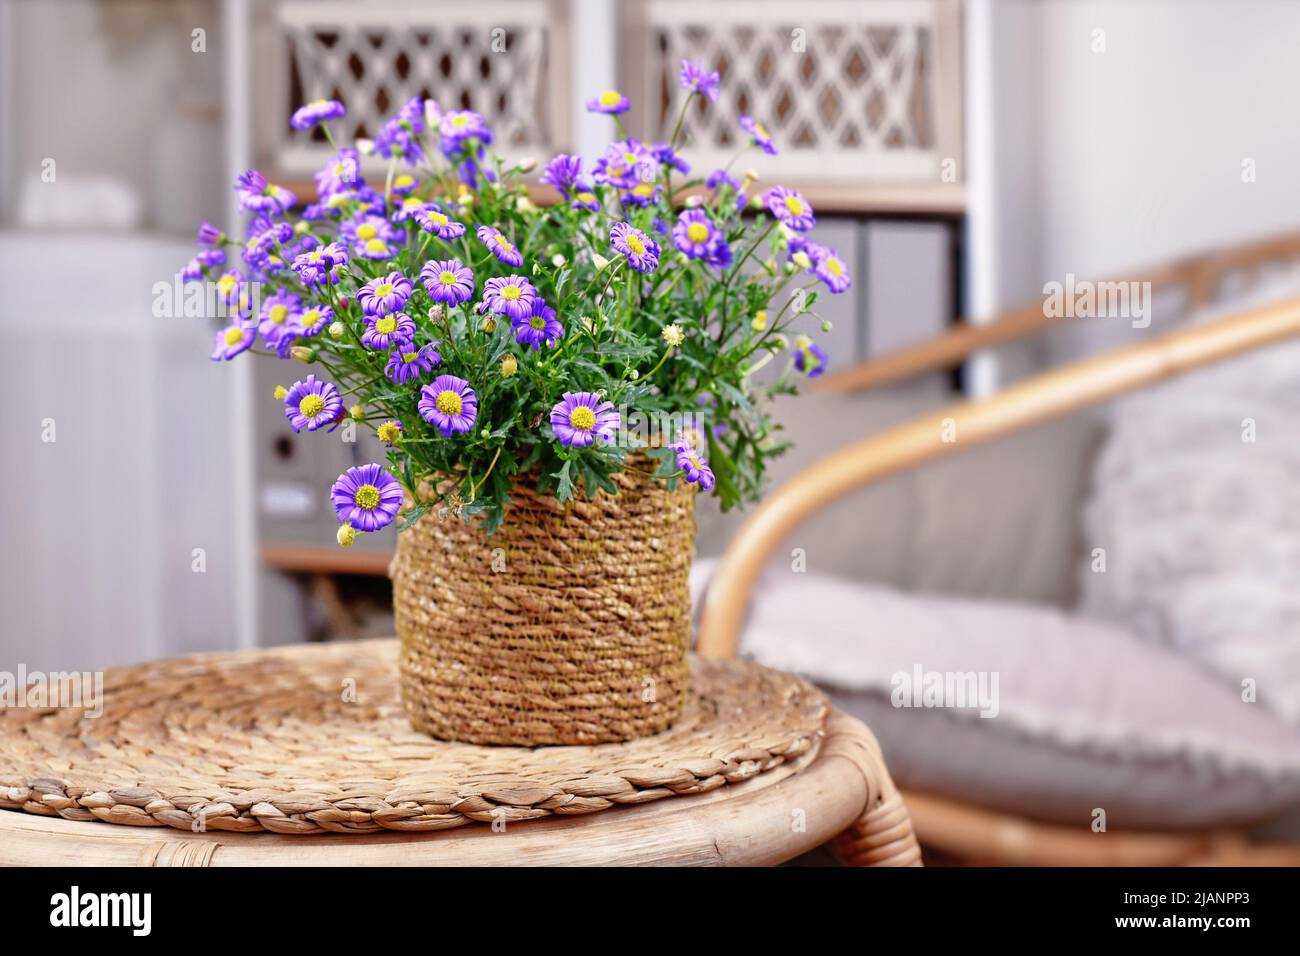 Blooming purple rocky daisy flowers in basket pot on table Stock Photo